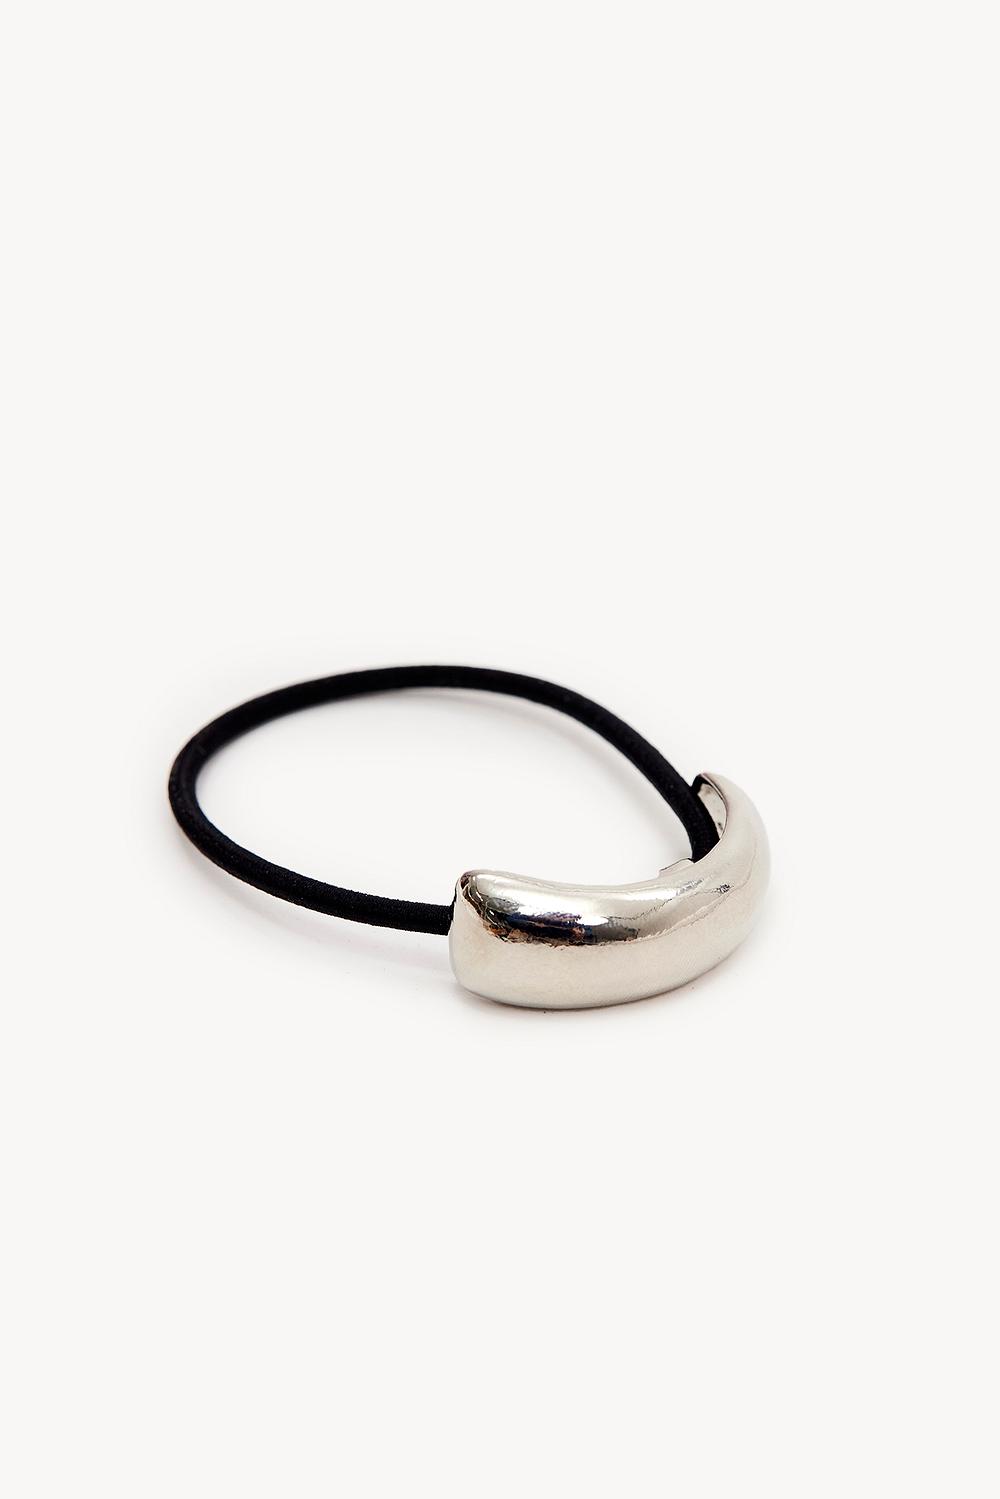 Hair tie with silver detail